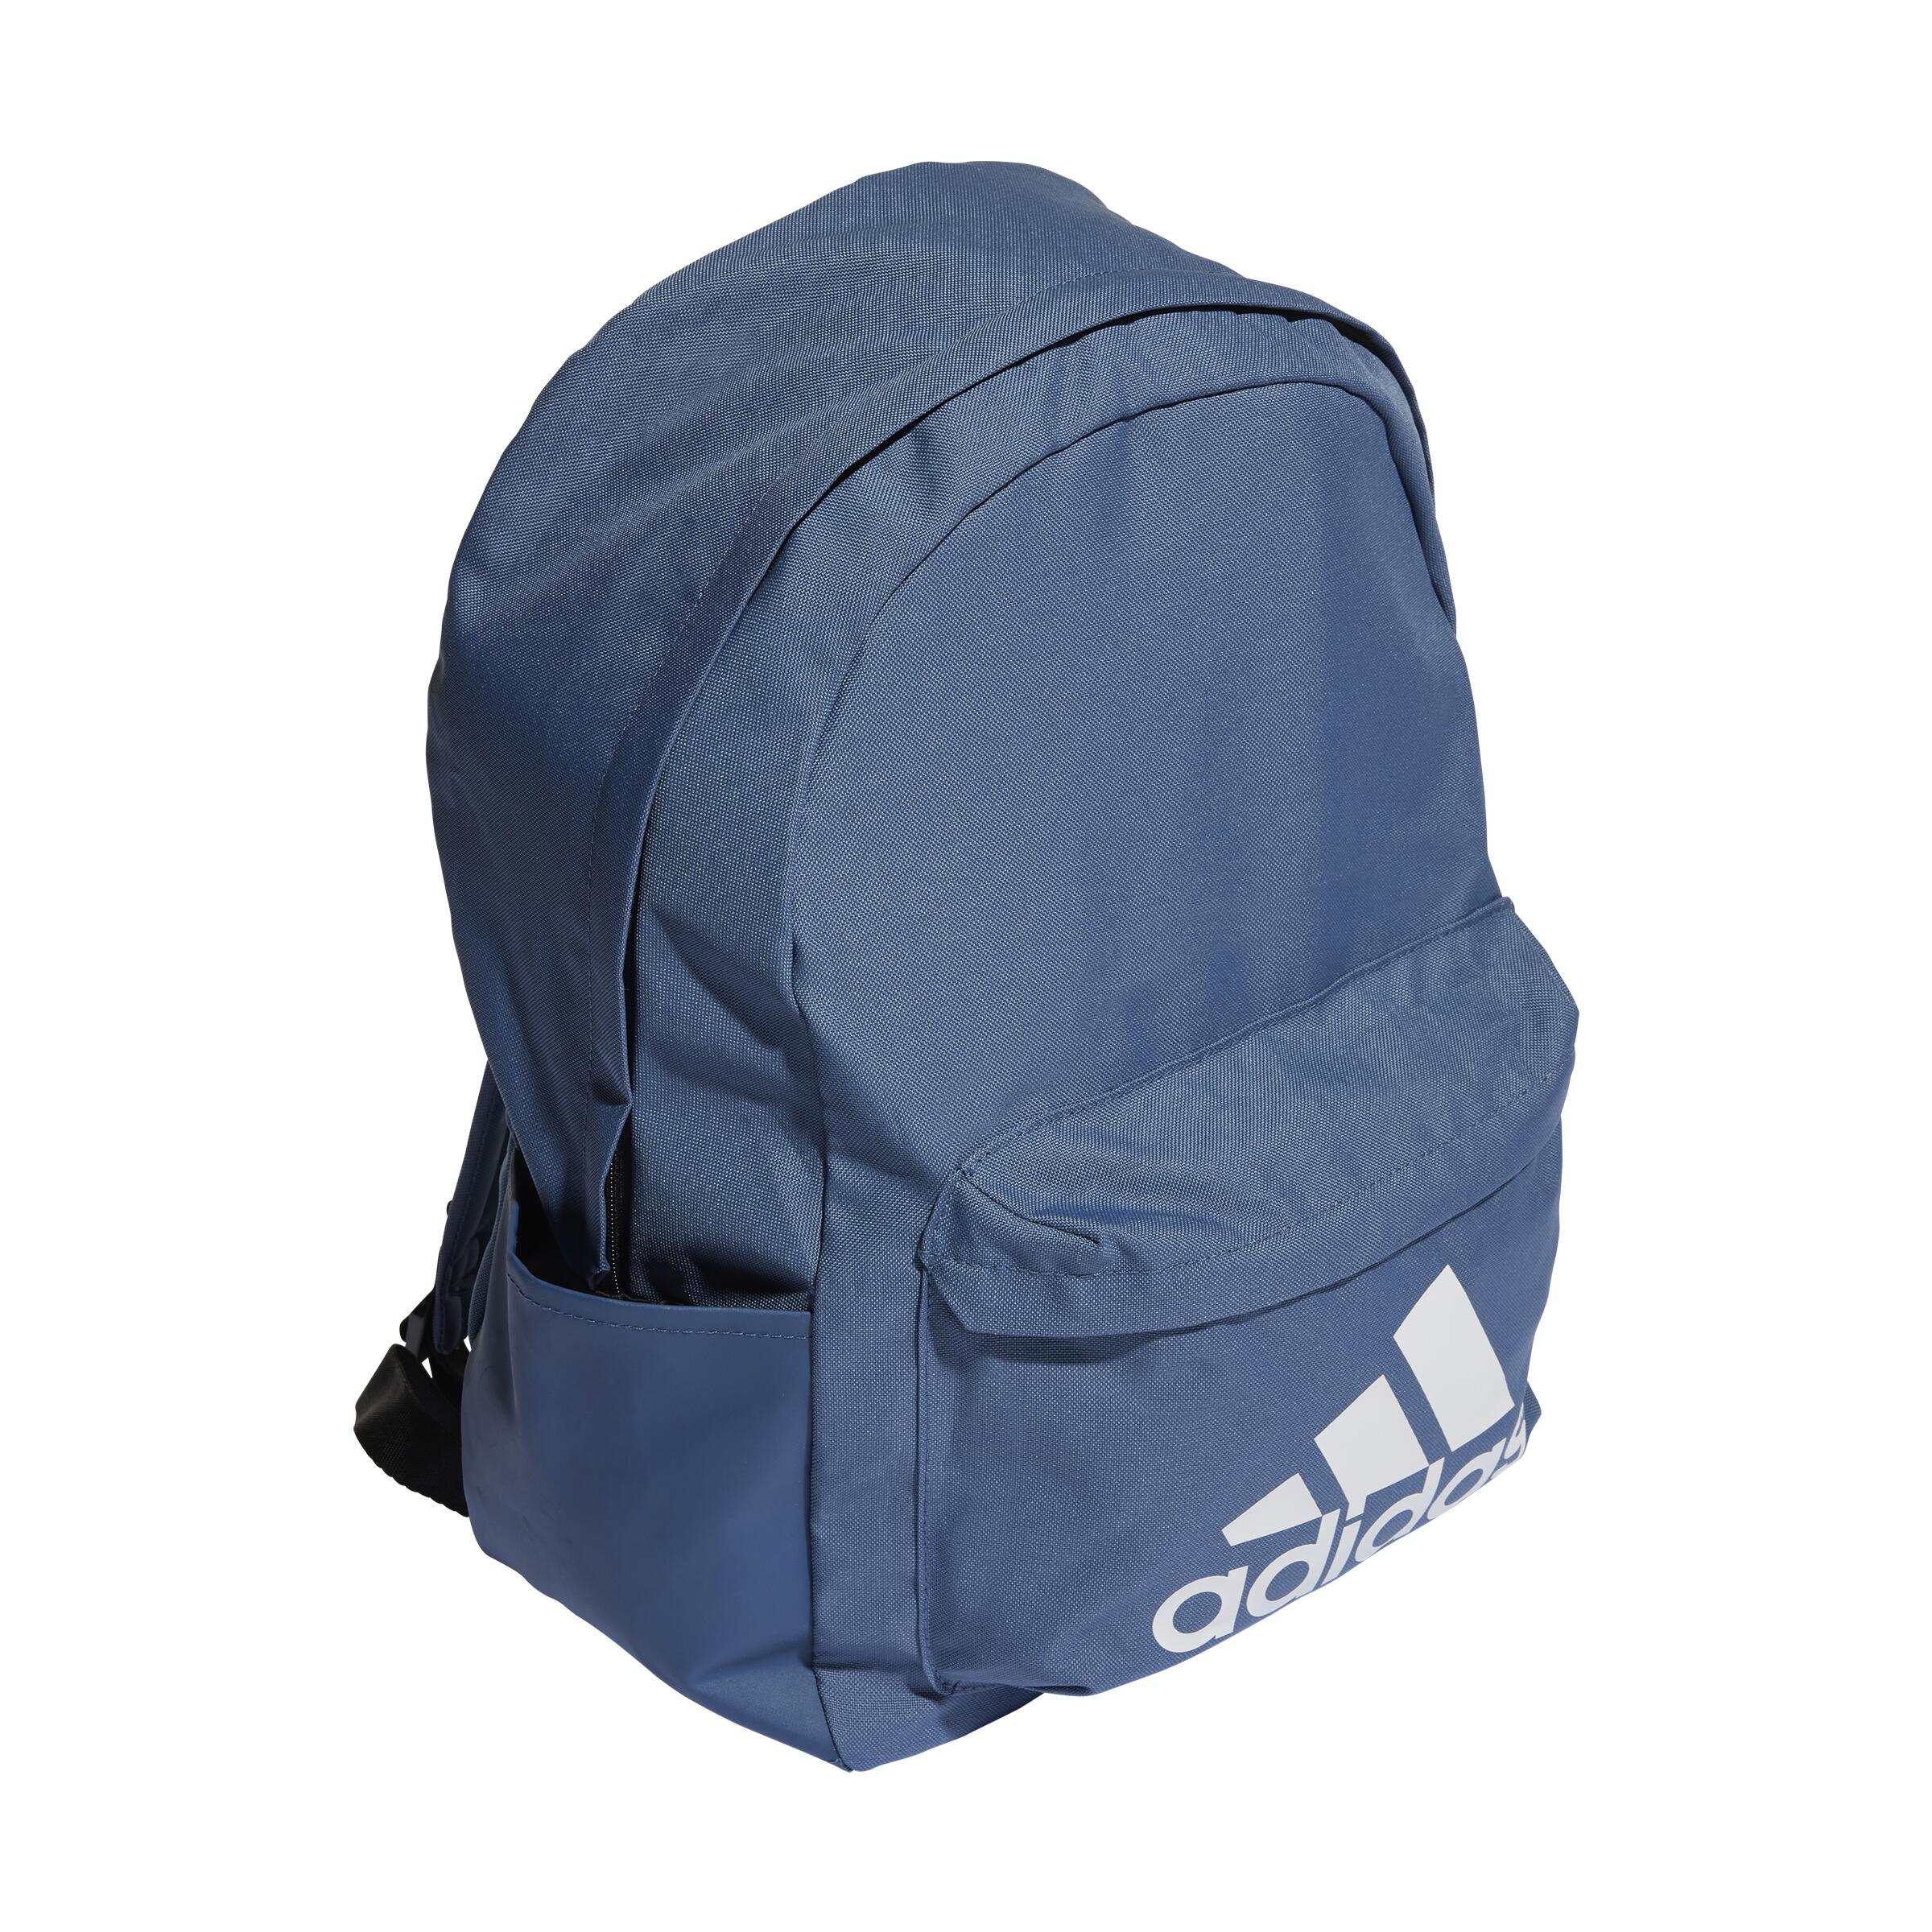 Backpack Classic Badge of Sport - Blue 2/6